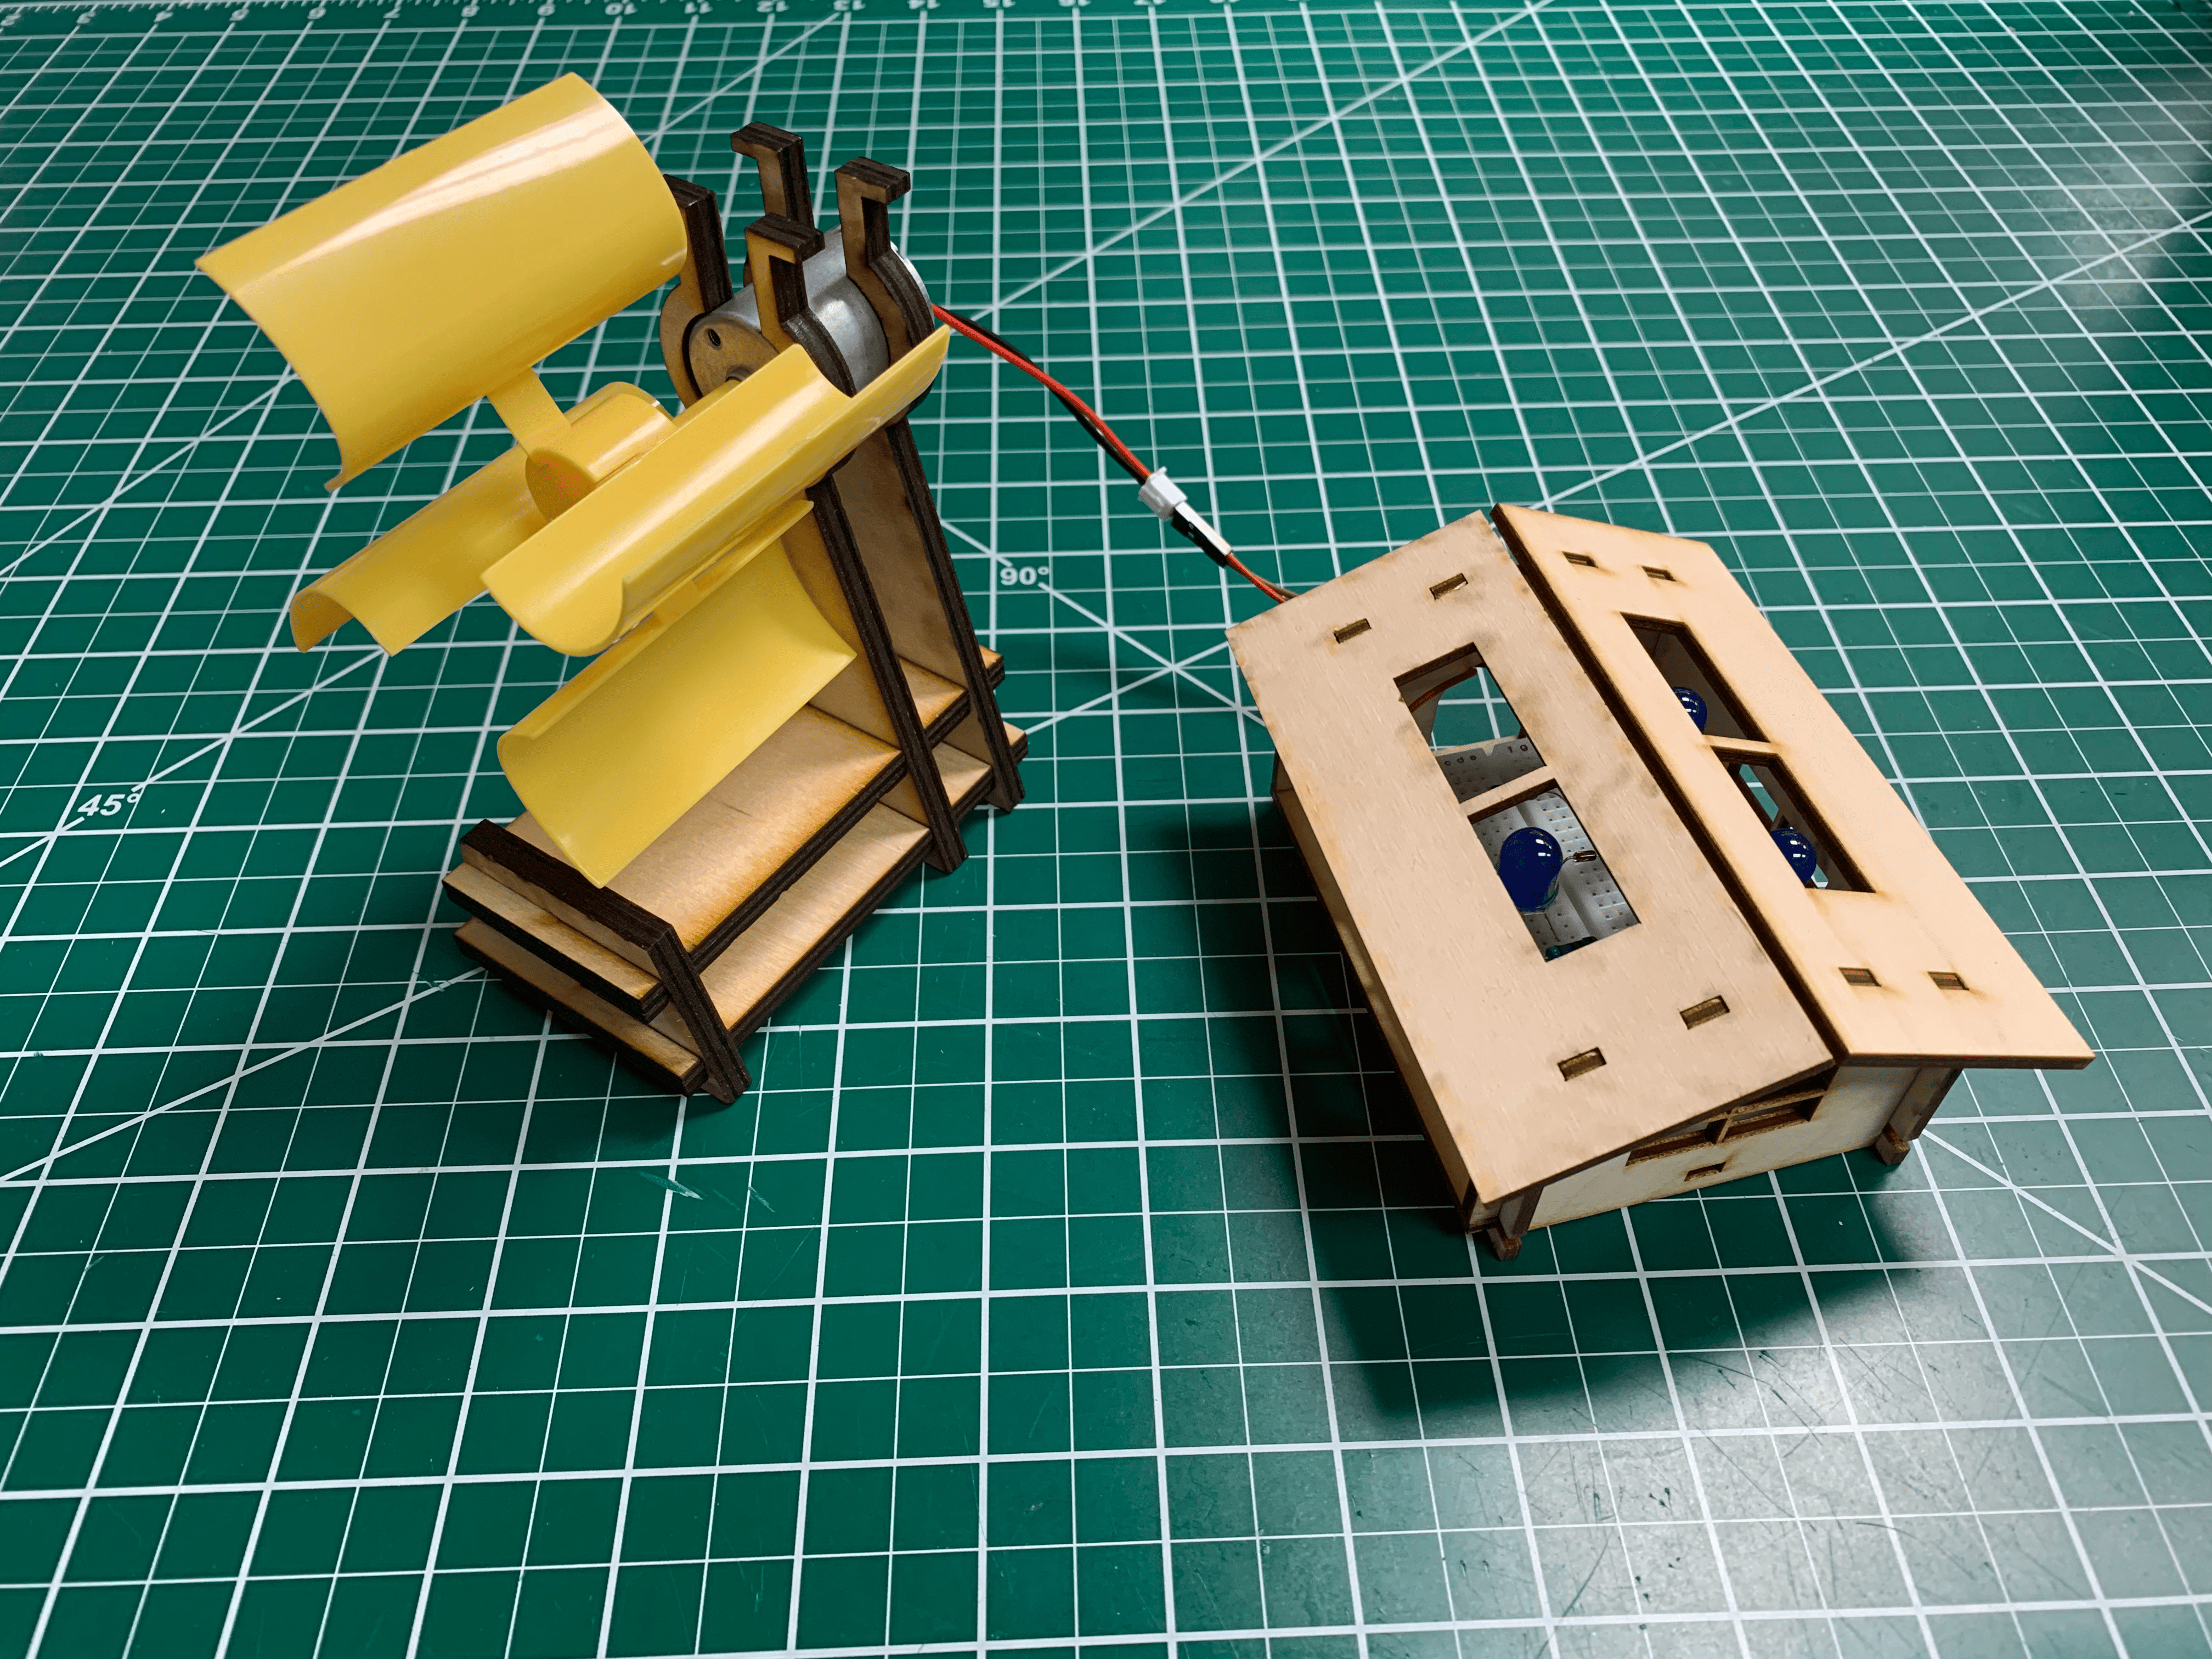 wood and plastic wind turbine model with small wood house, connected with wires